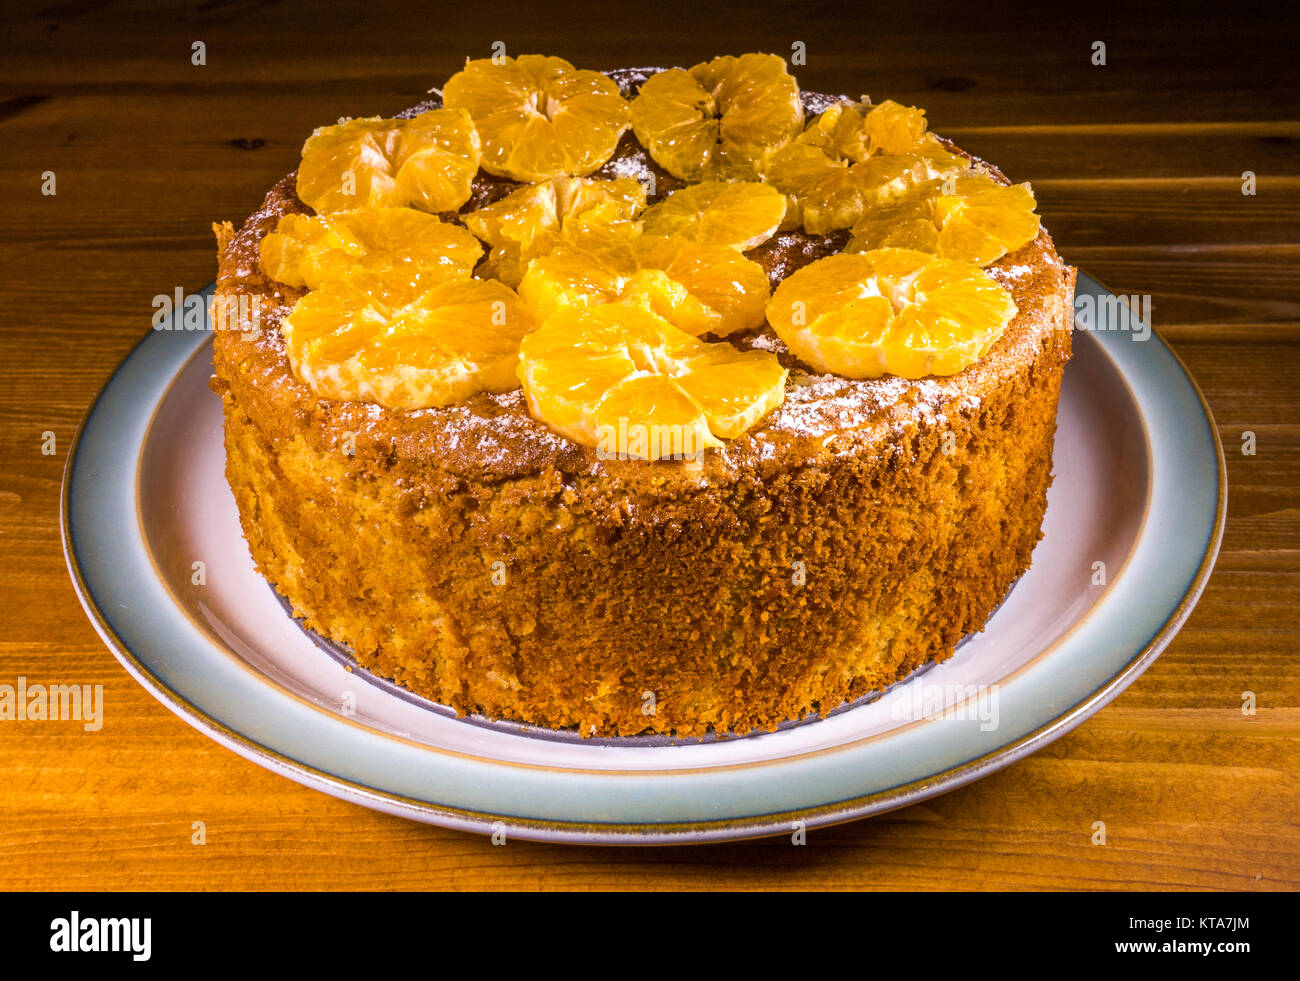 An appetising, freshly baked, spiced almond and sliced orange (clementines) cake, sitting on a ceramic plate. England, UK. Stock Photo